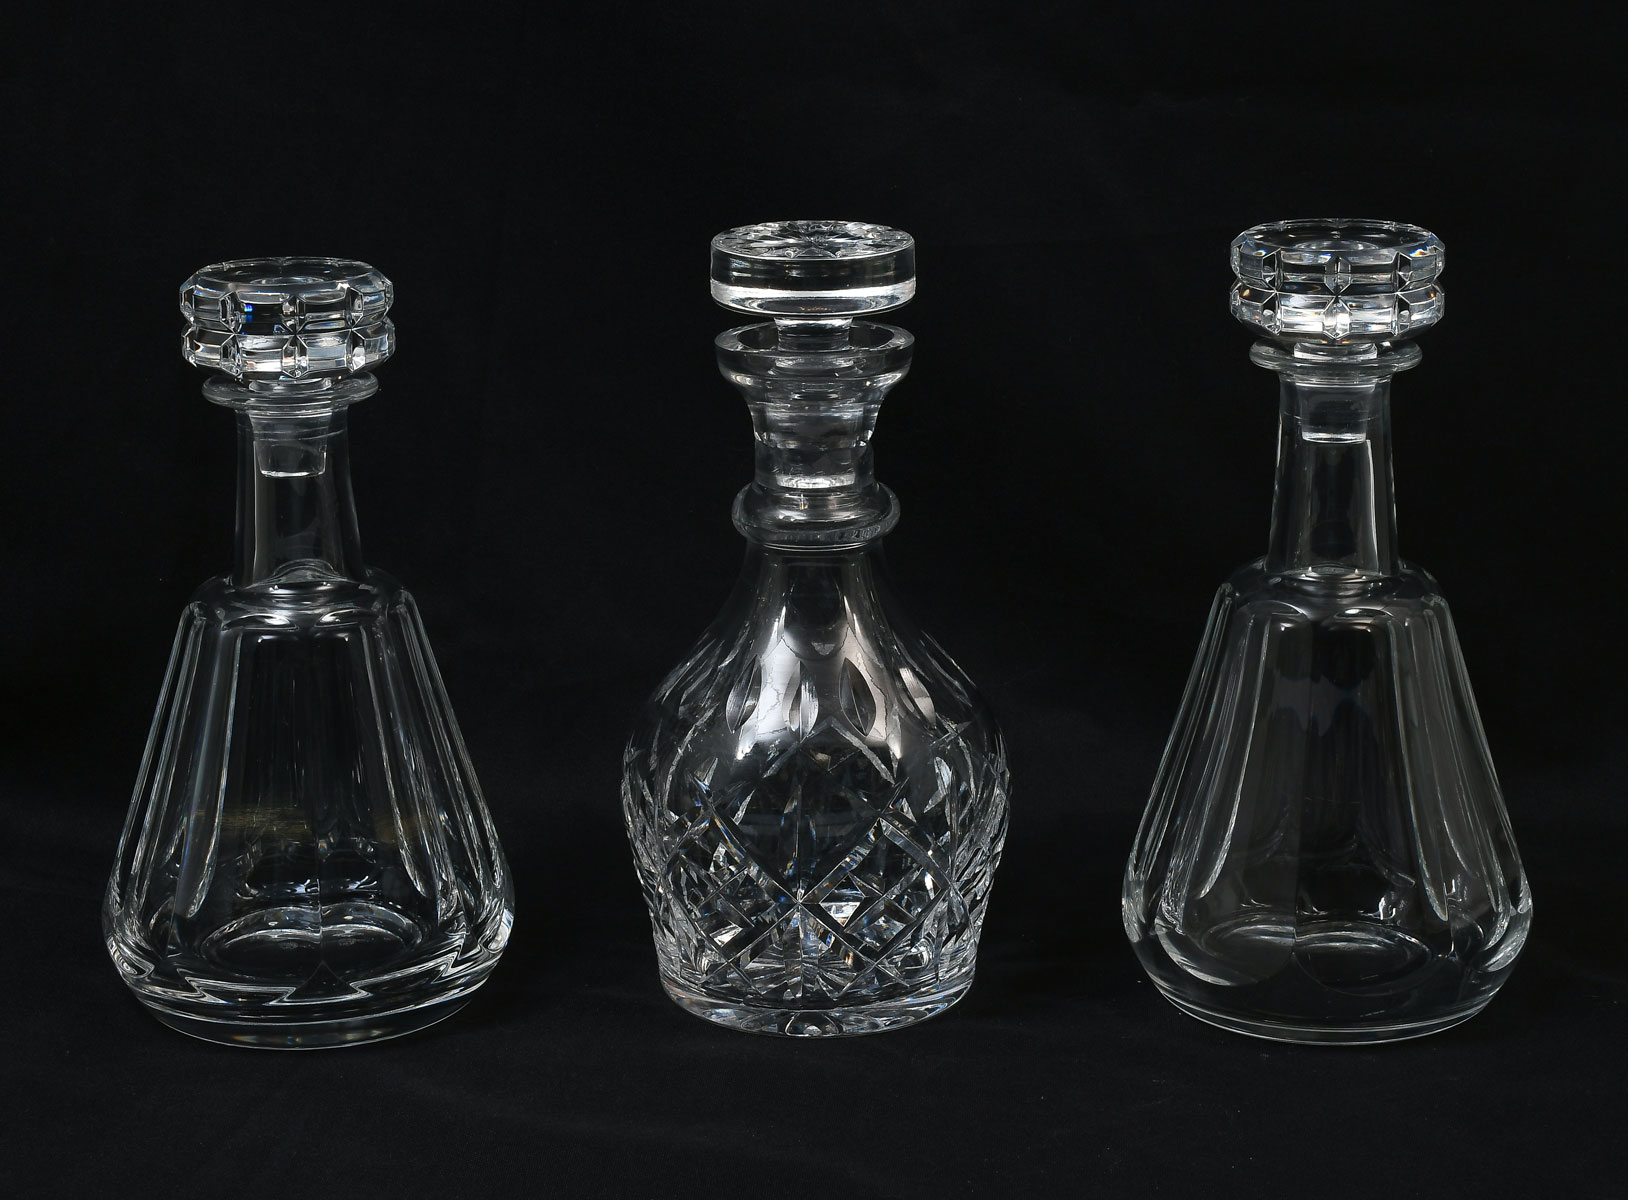 3 PC BACCARAT WATERFORD DECANTERS  27583f